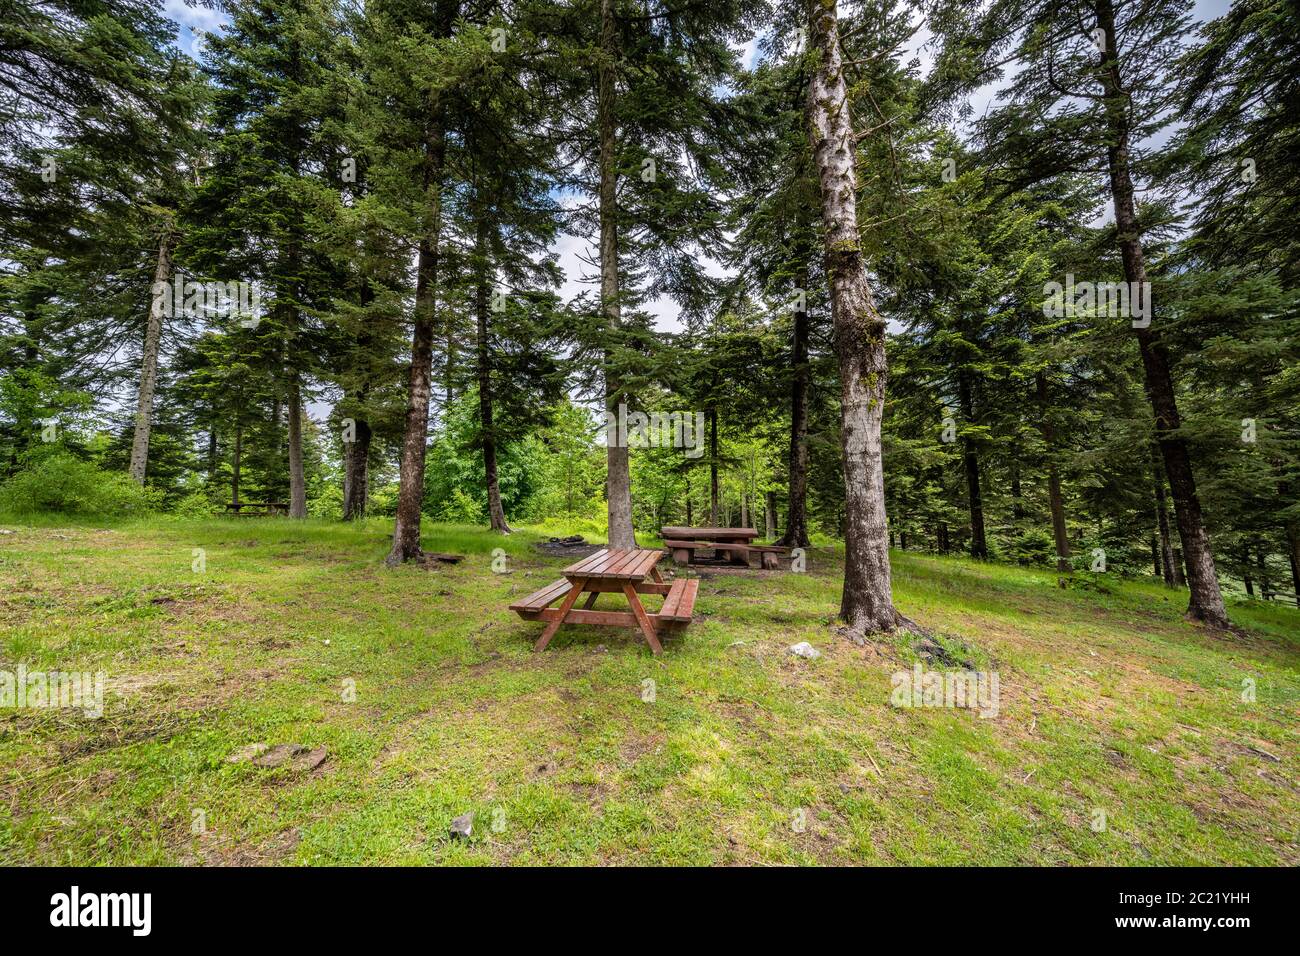 a resting area in the forest, a table and benches made of wood. Stock Photo